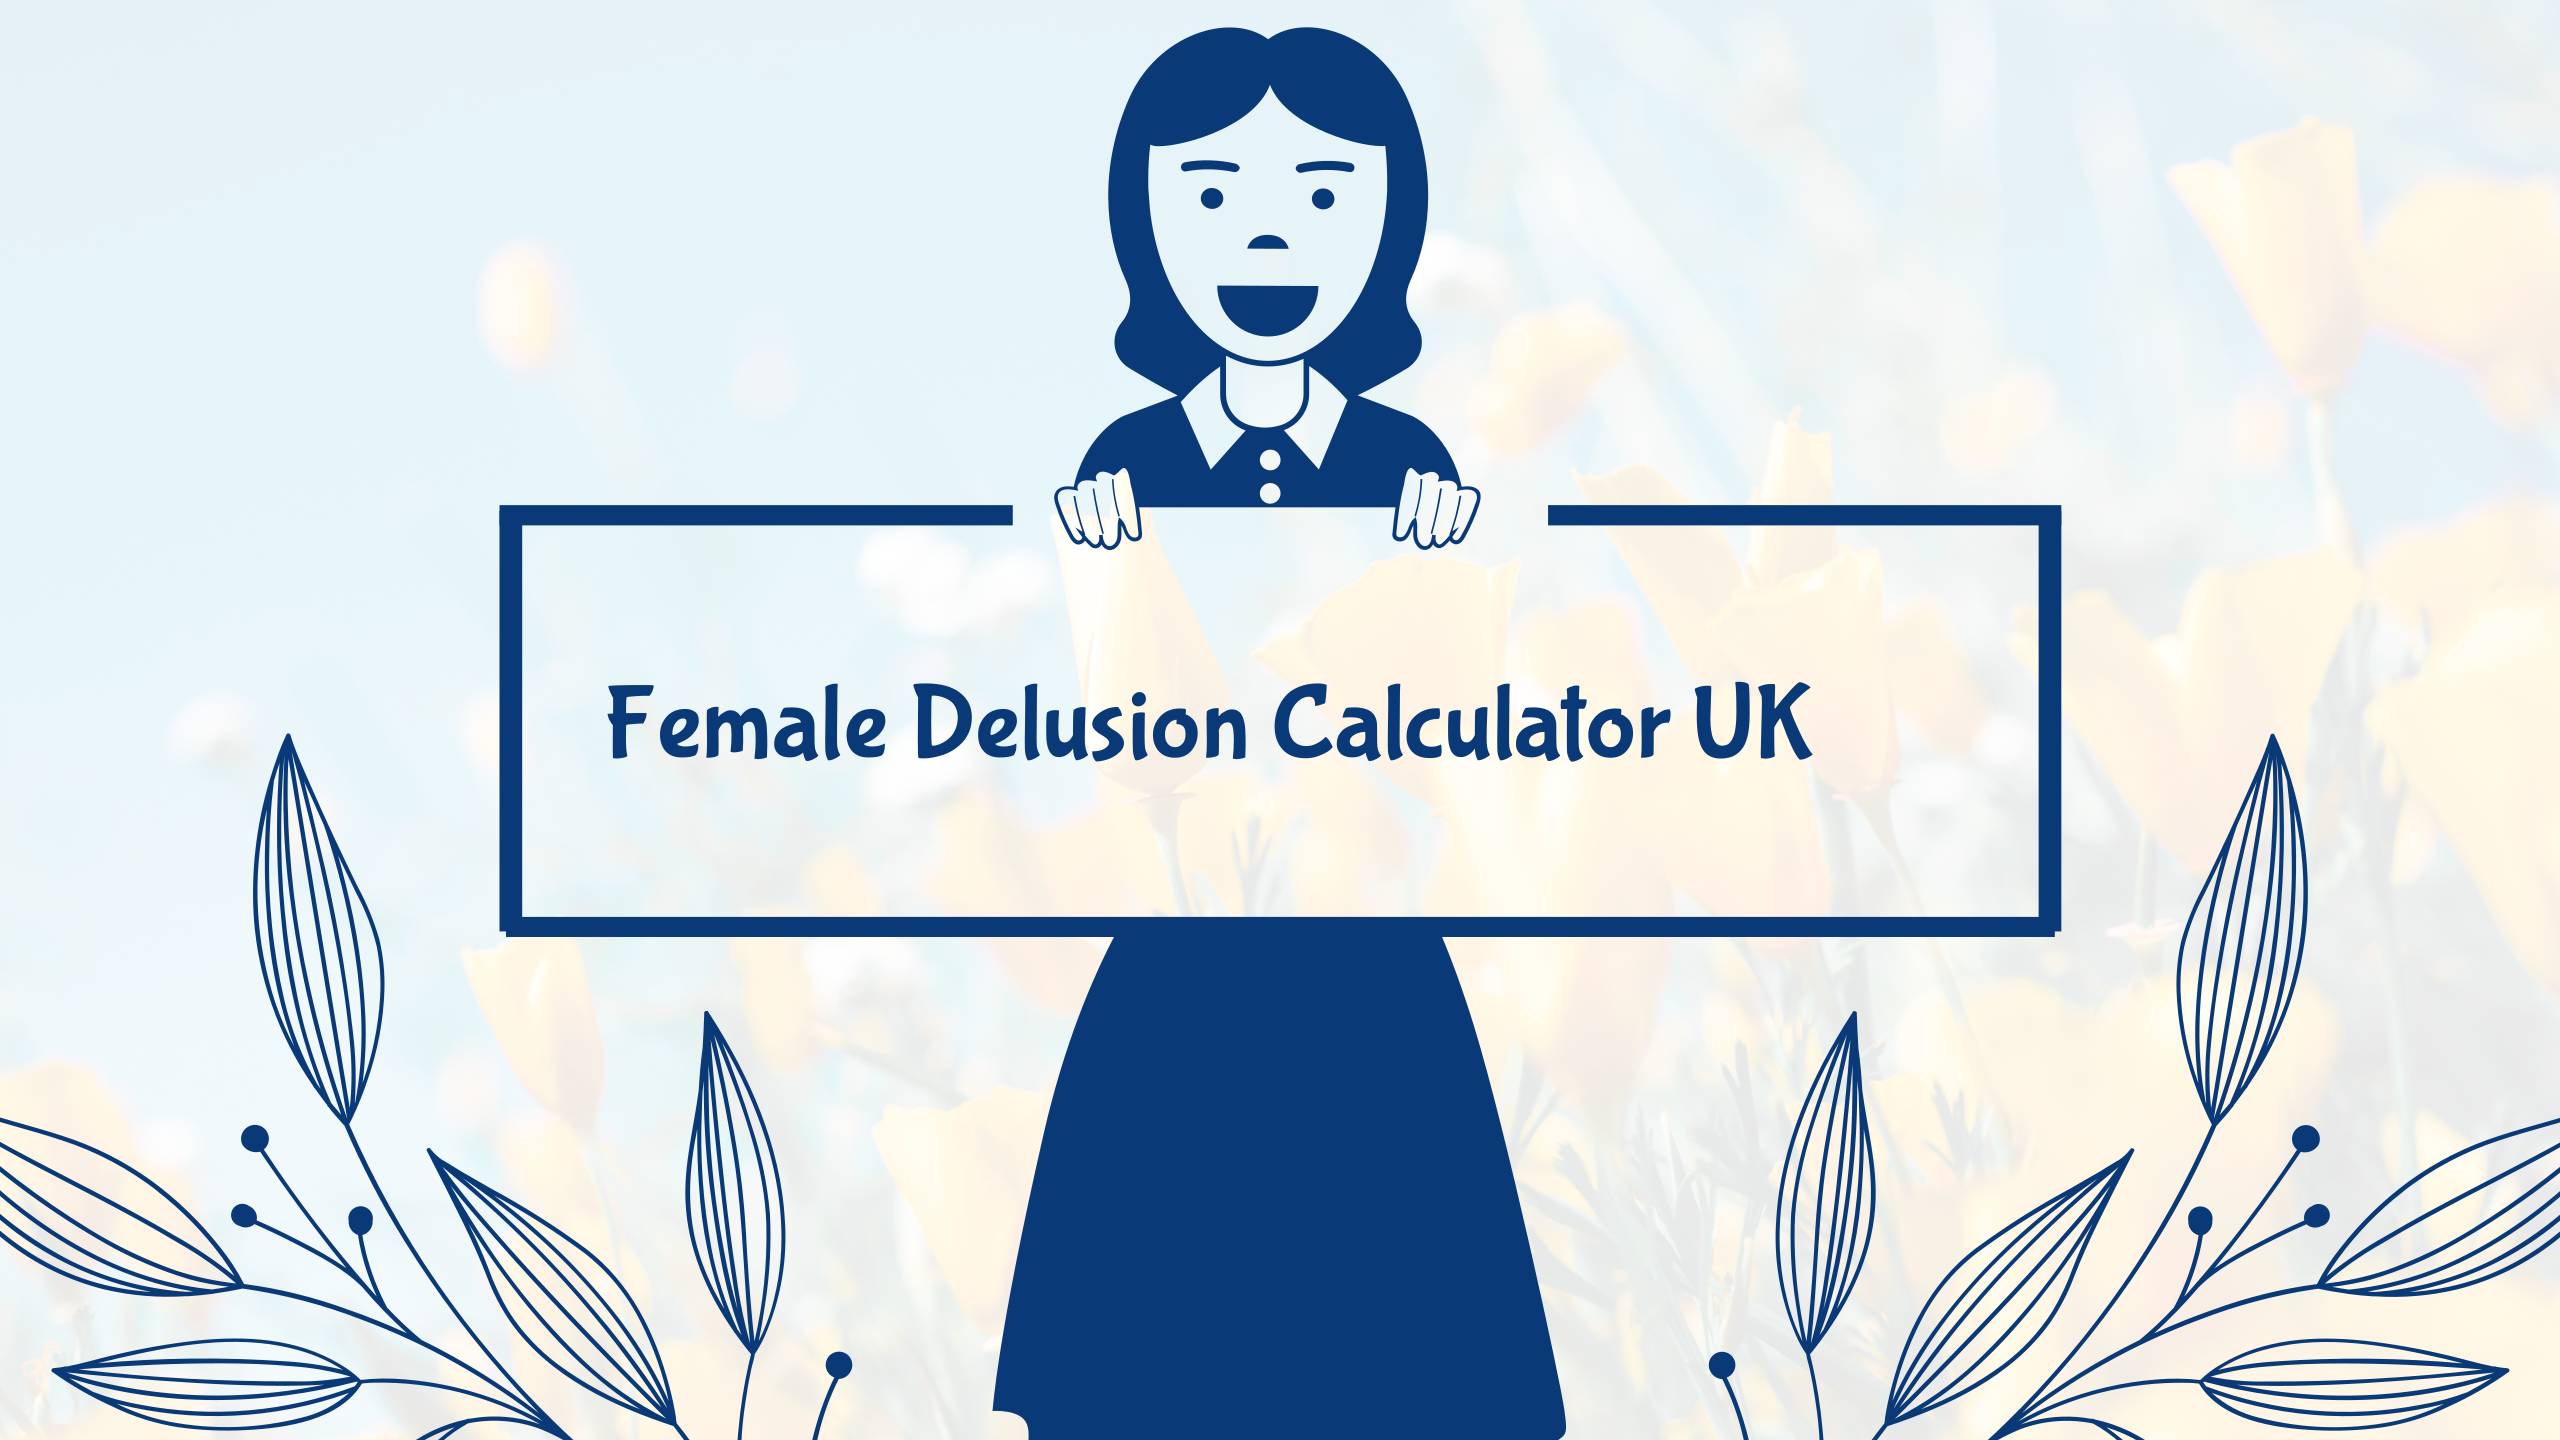 Female Delusion Calculator in the UK: A Comprehensive Assessment of Delusional Thinking